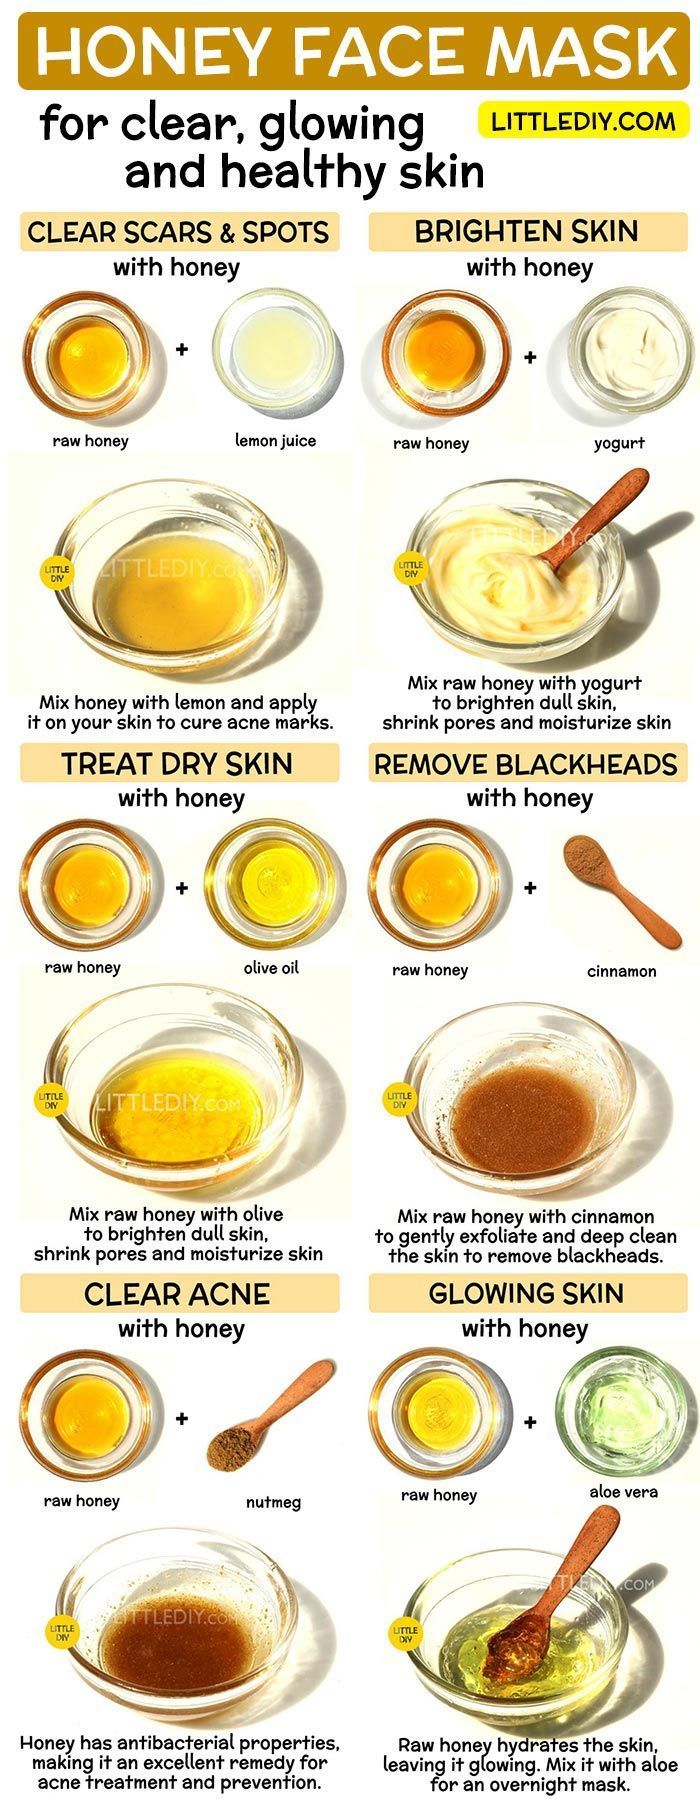 HONEY FACE MASKS for clear, bright and glowing skin - LITTLE DIY - HONEY FACE MASKS for clear, bright and glowing skin - LITTLE DIY -   diy Face Mask honey